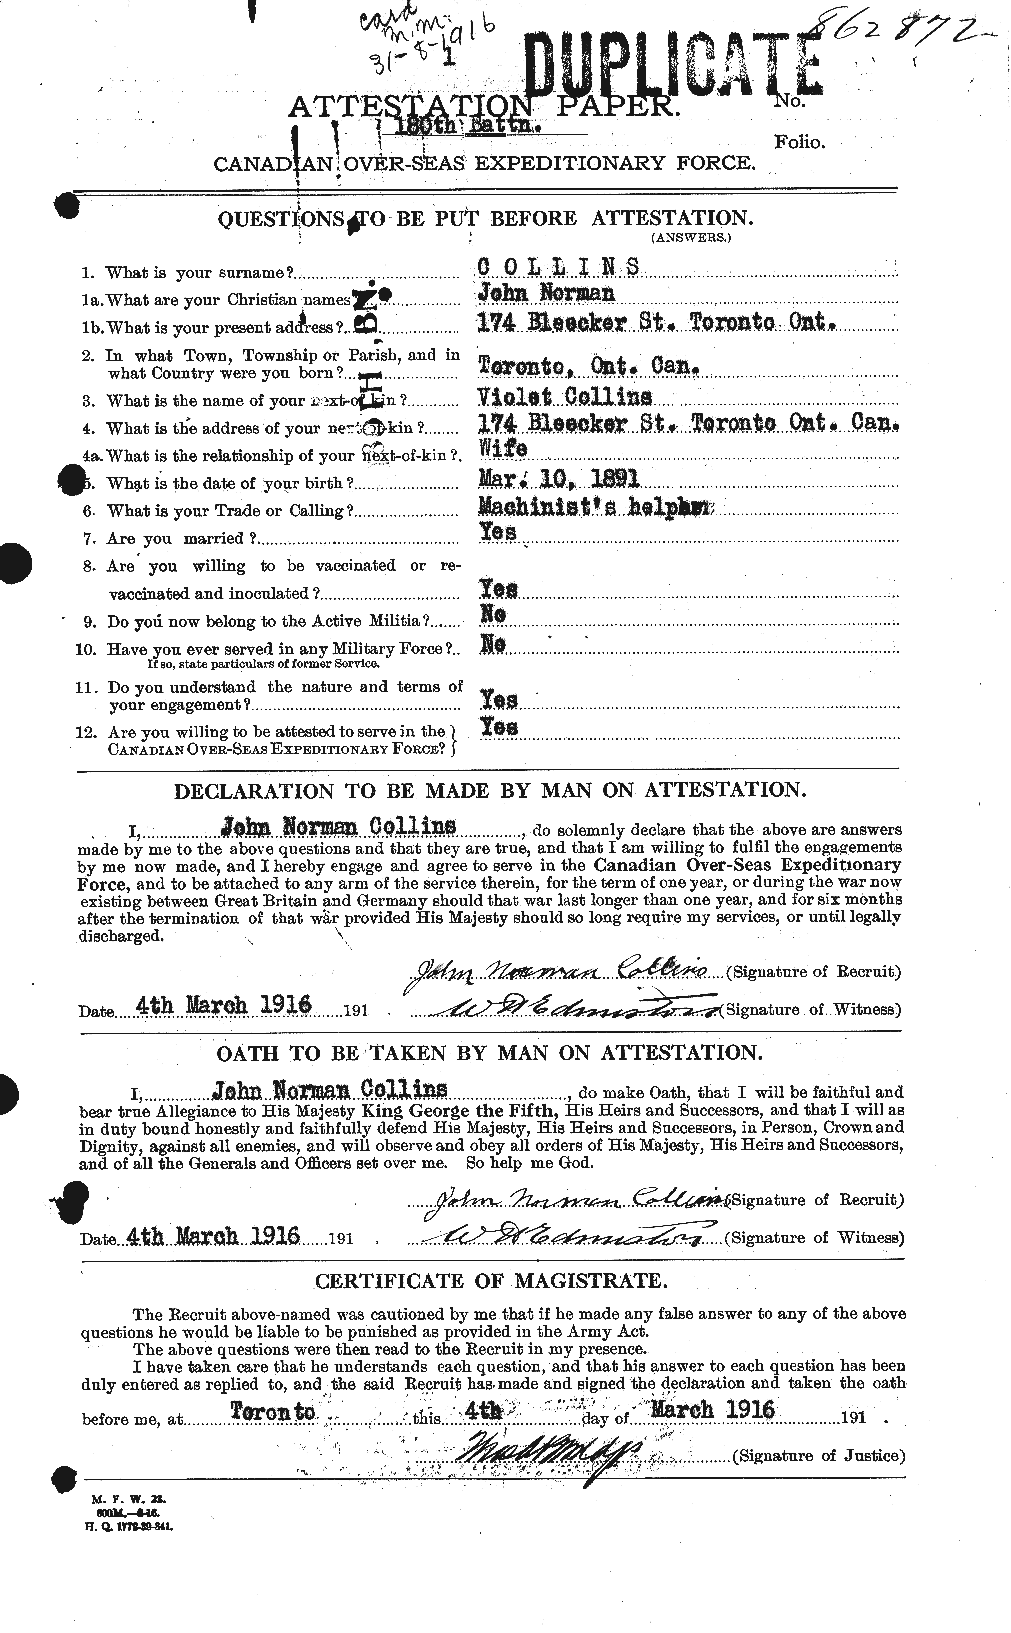 Personnel Records of the First World War - CEF 069540a